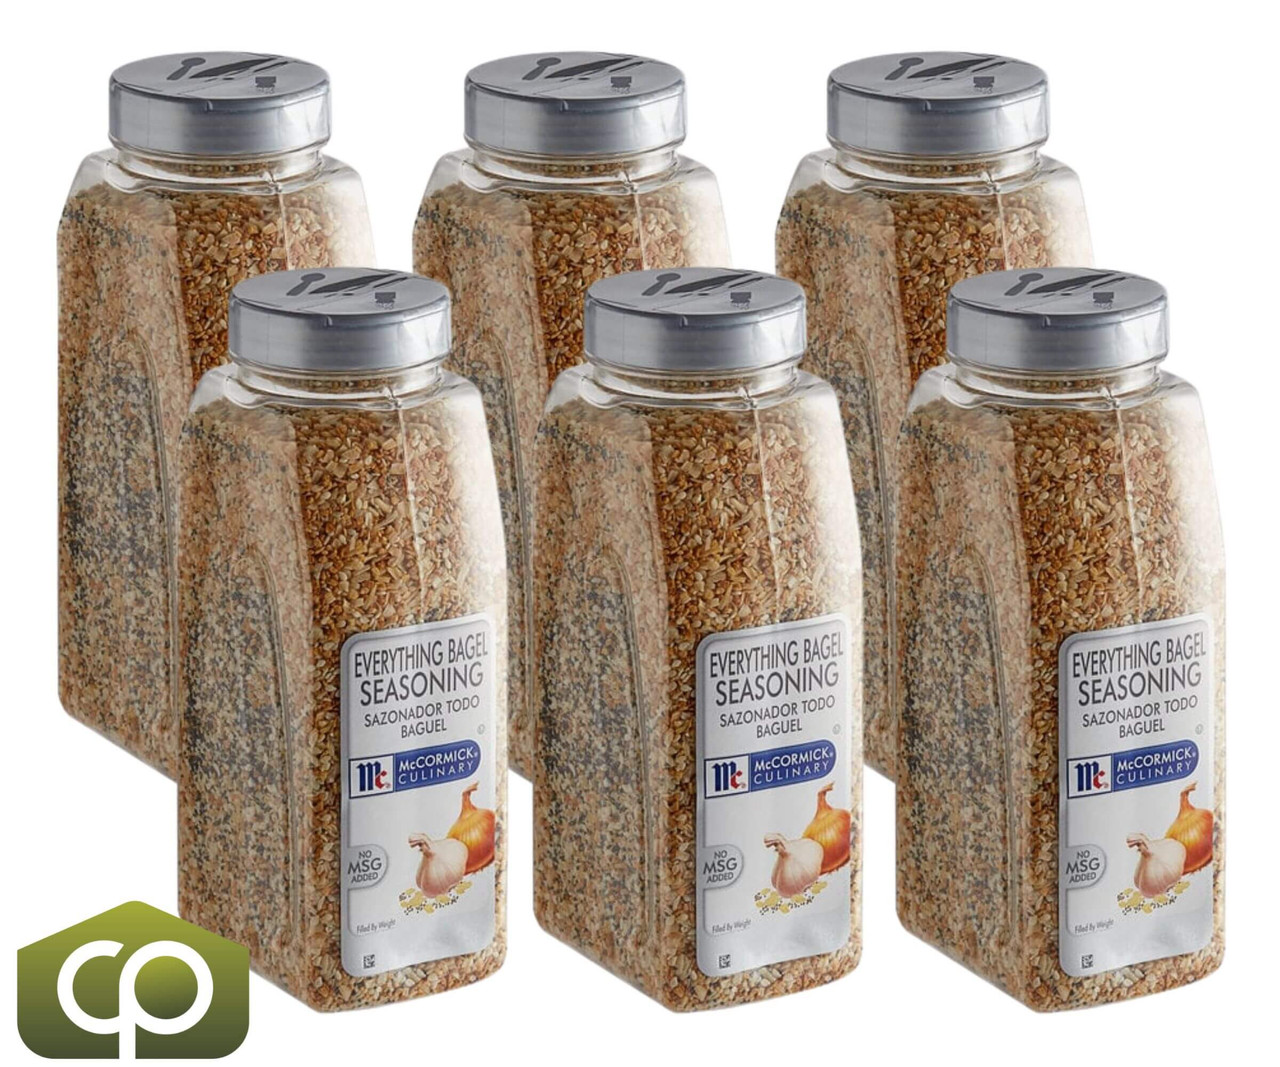 McCormick Culinary Everything Bagel Seasoning Savory Crunch, 21 oz. - 6/Case - Chicken Pieces